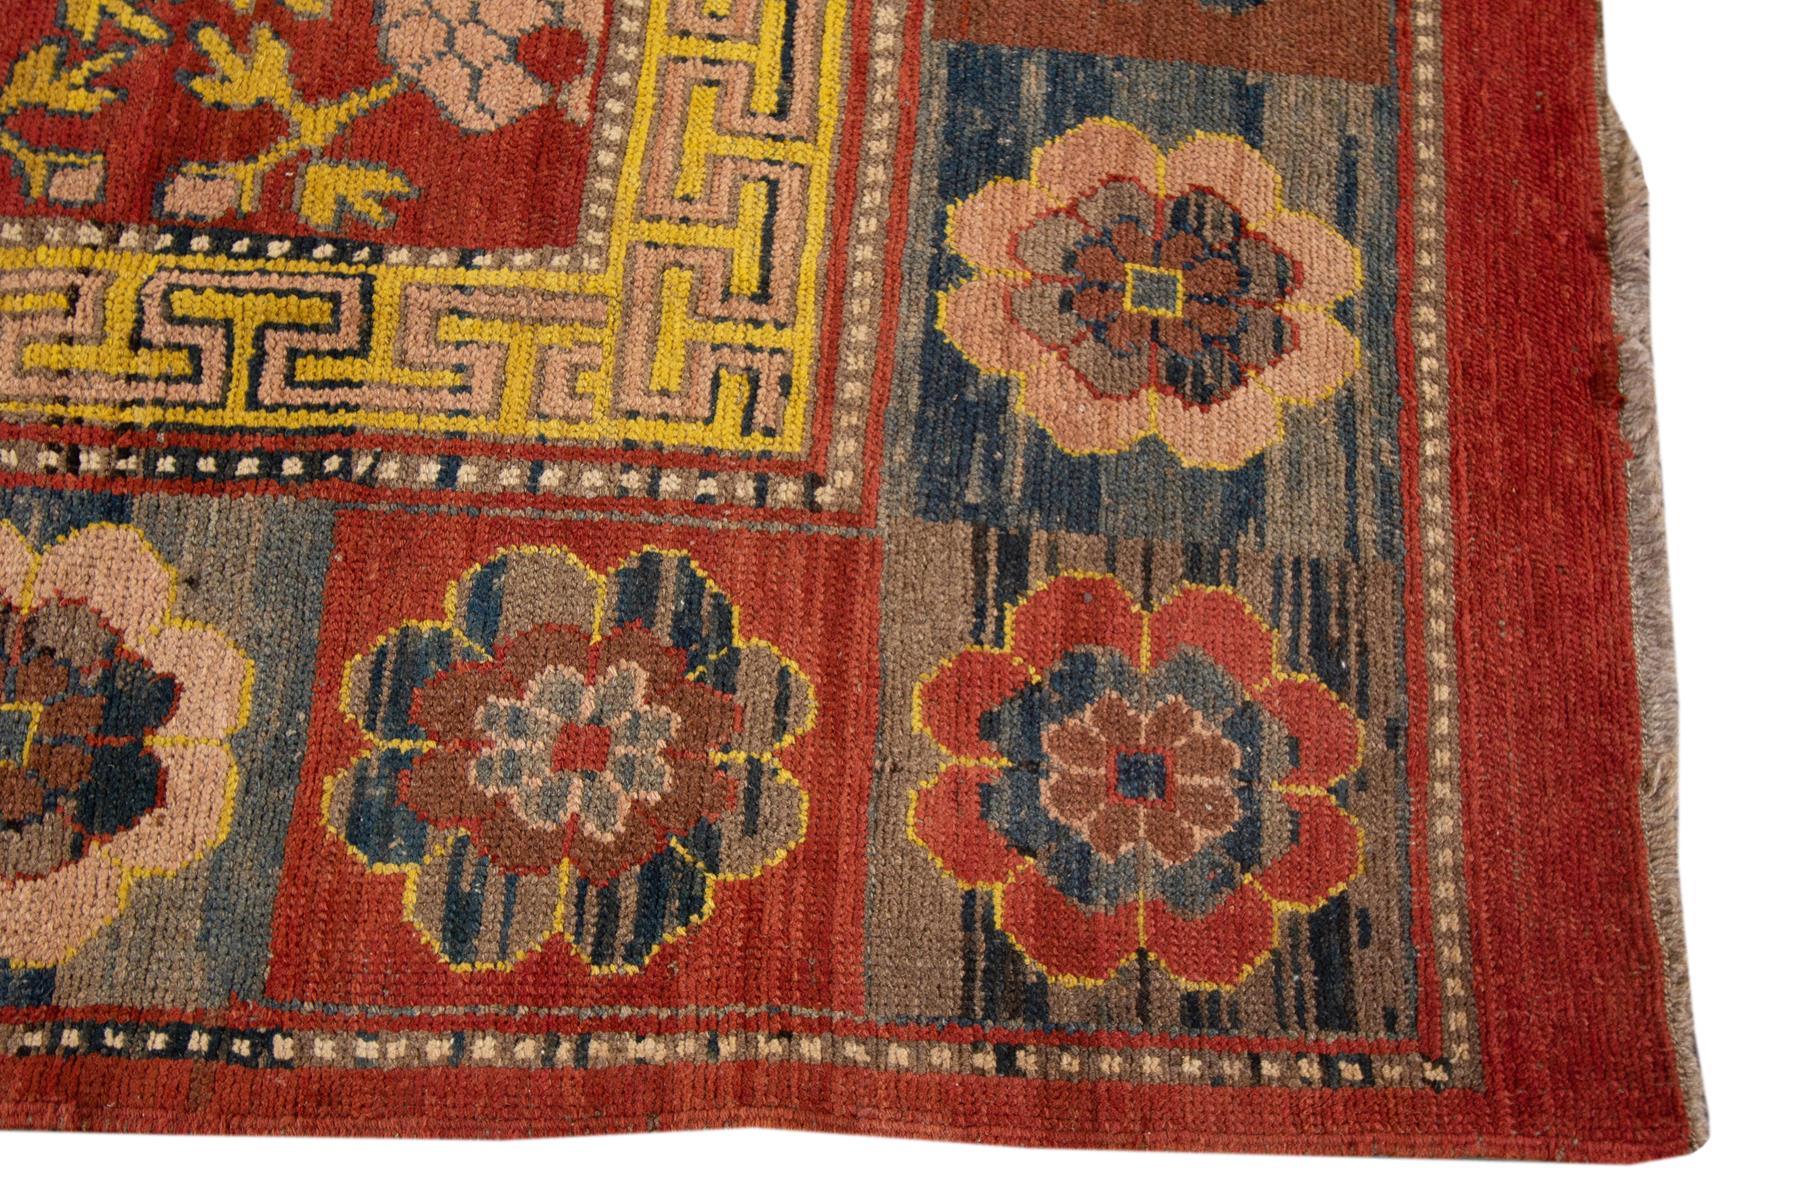 Introducing our cutting-edge 2017/2018 Northwest Revival collection of exquisite Kohtan rugs of the highest quality with fine details, magnificent colors, and a ravishing design. These hand-knotted tapestries --  inspired by 19th century regional